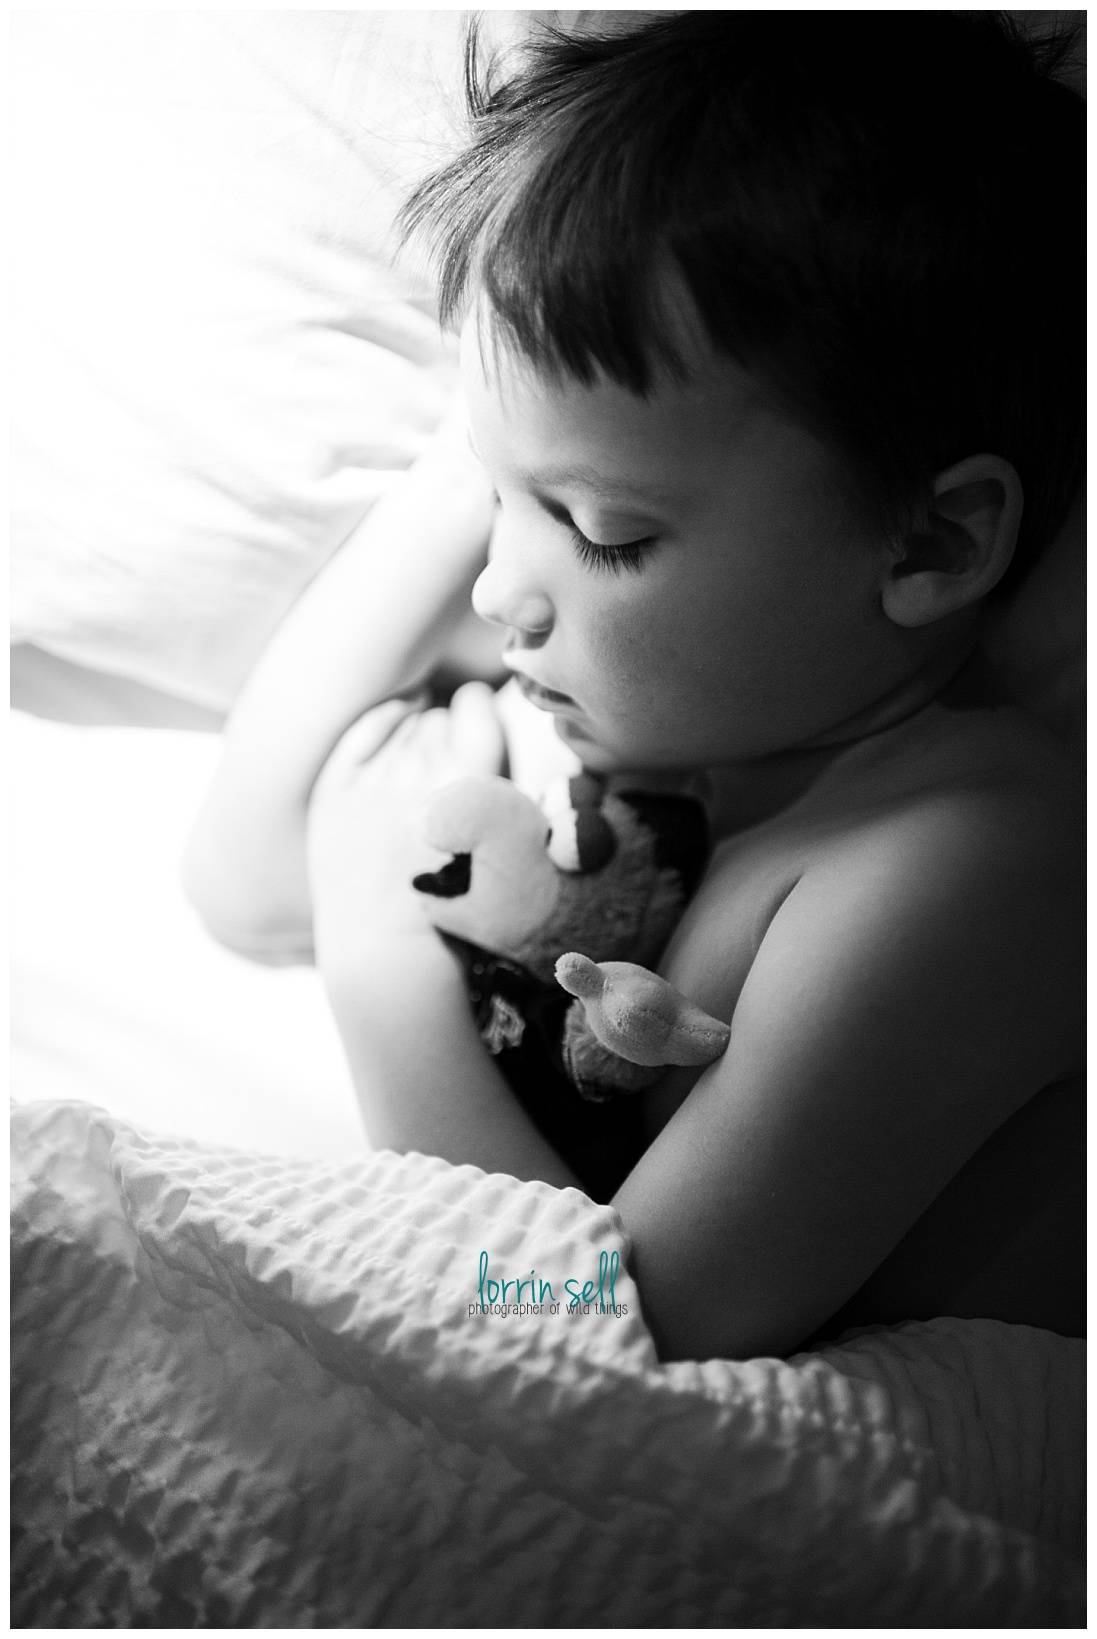 Do you cosleep with your baby? Have you dealt with these questions?